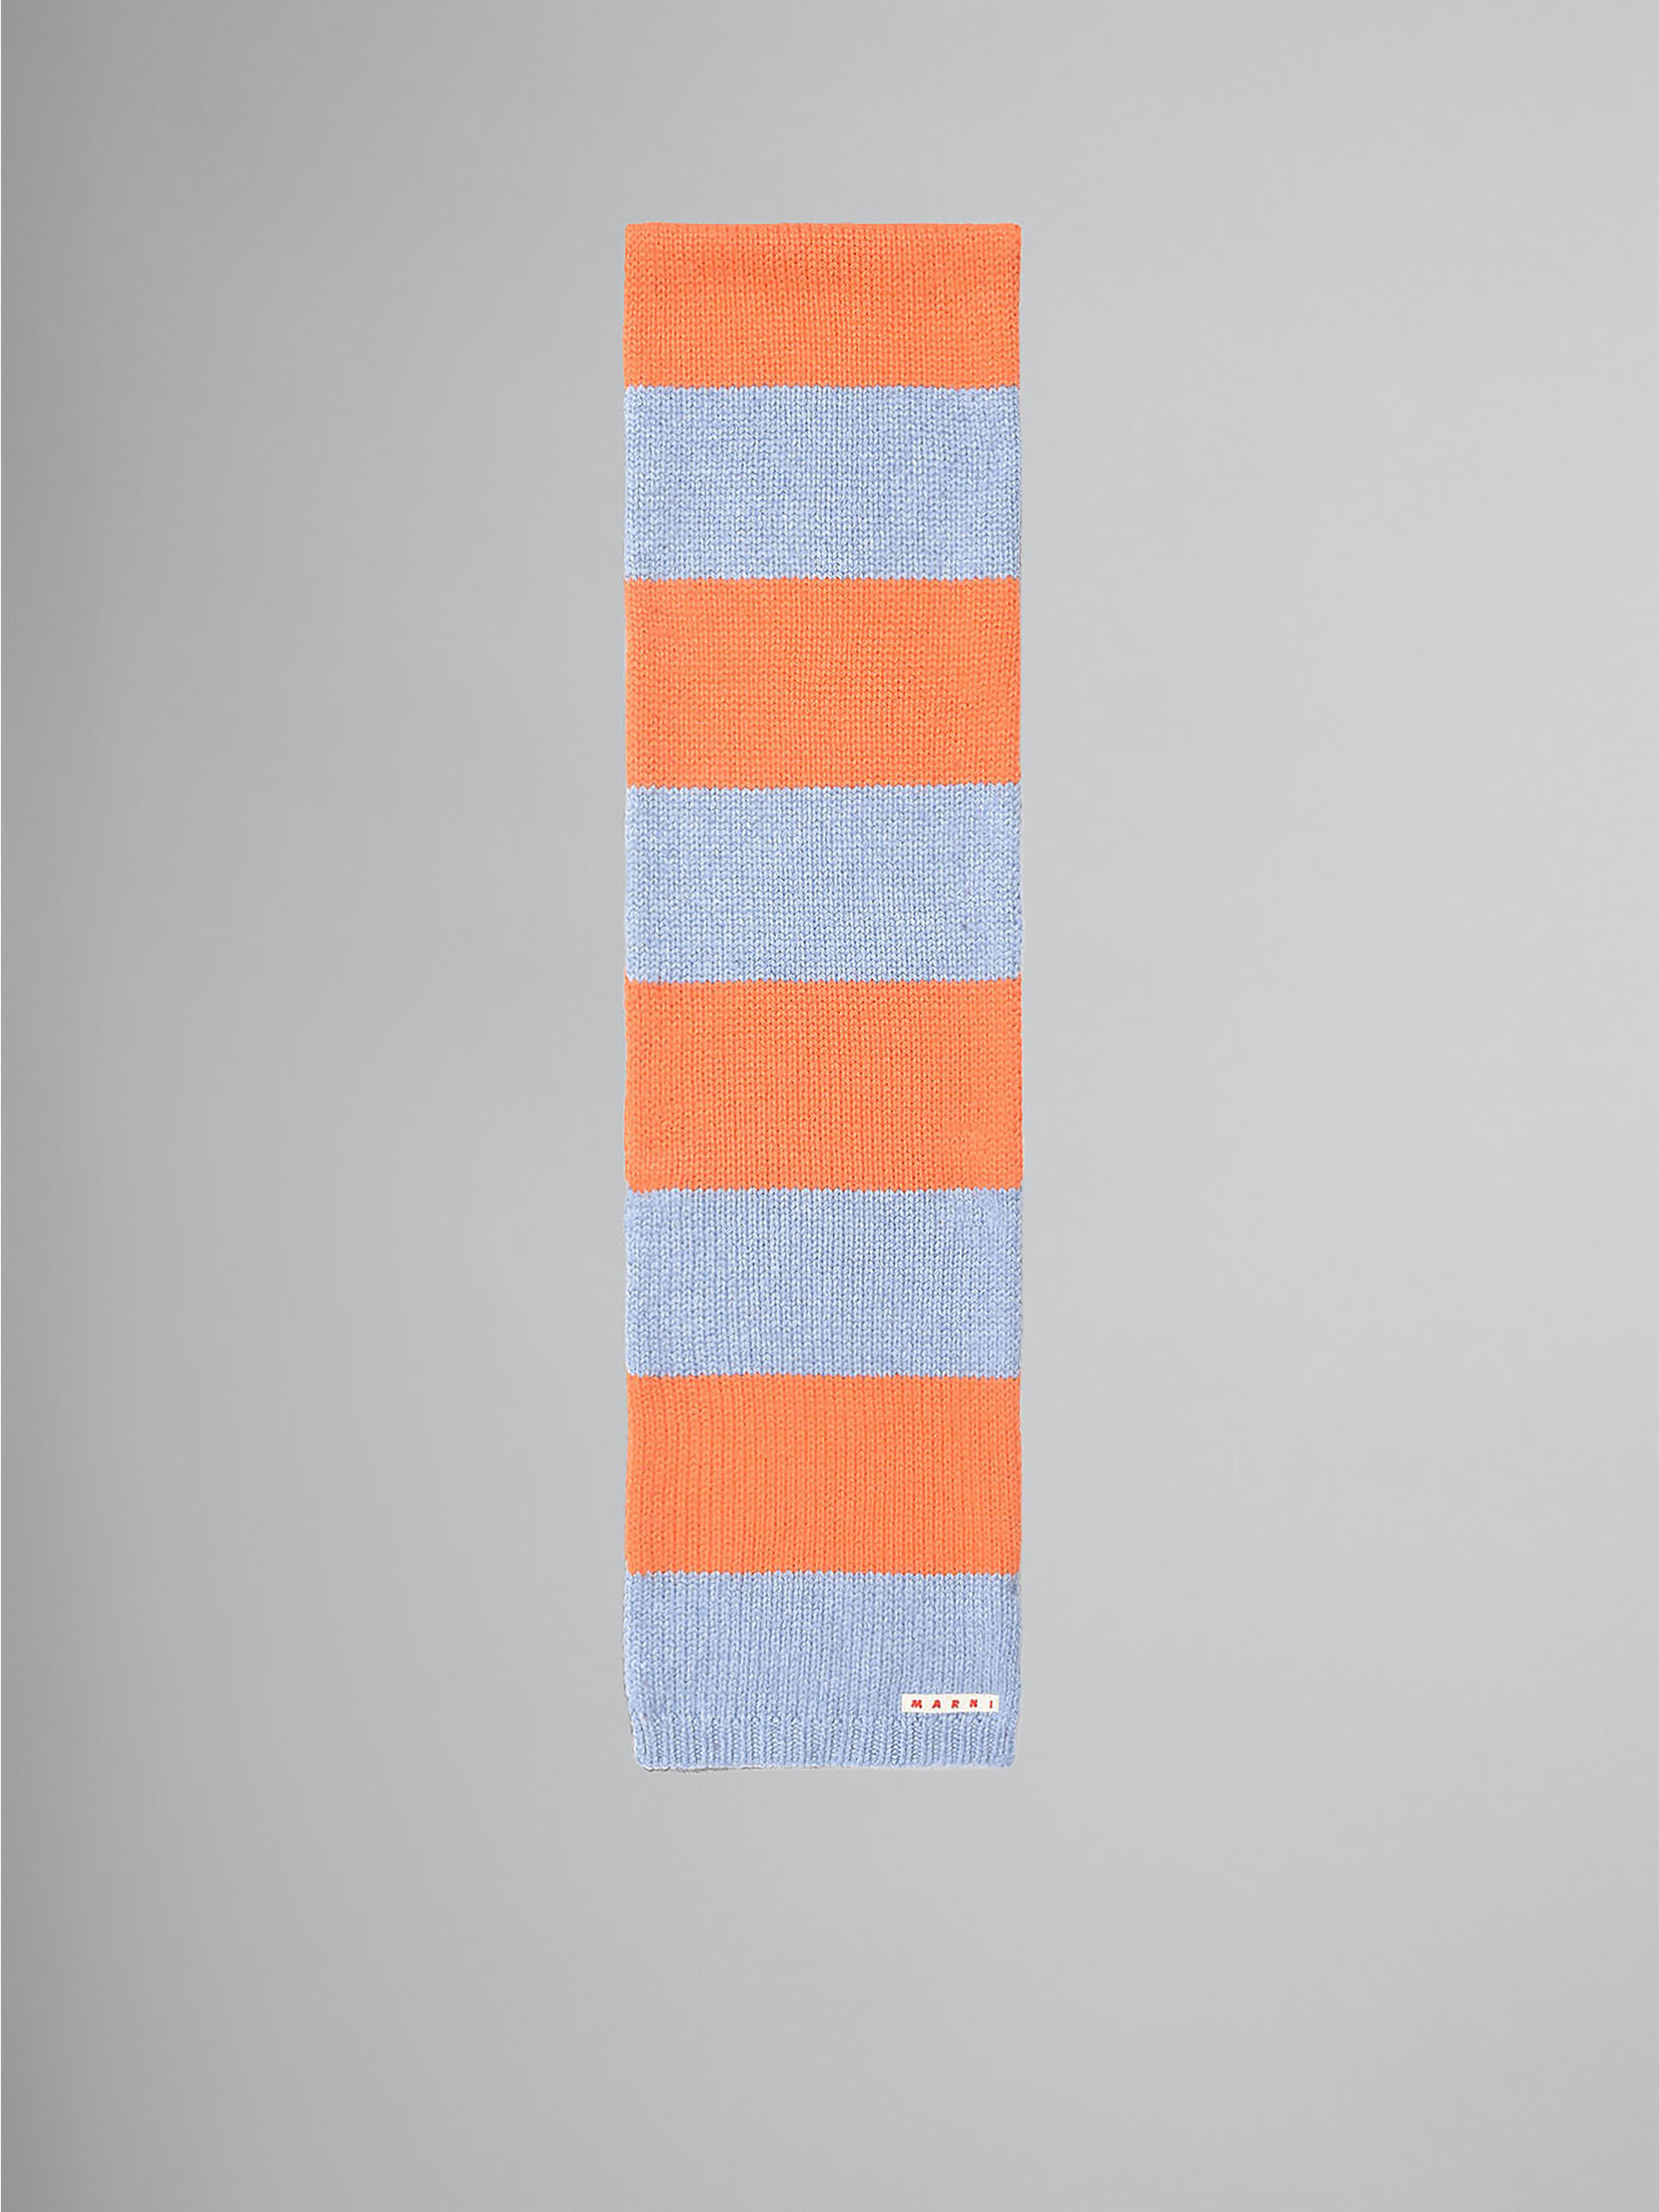 Multicoloured striped scarf - Scarves - Image 2